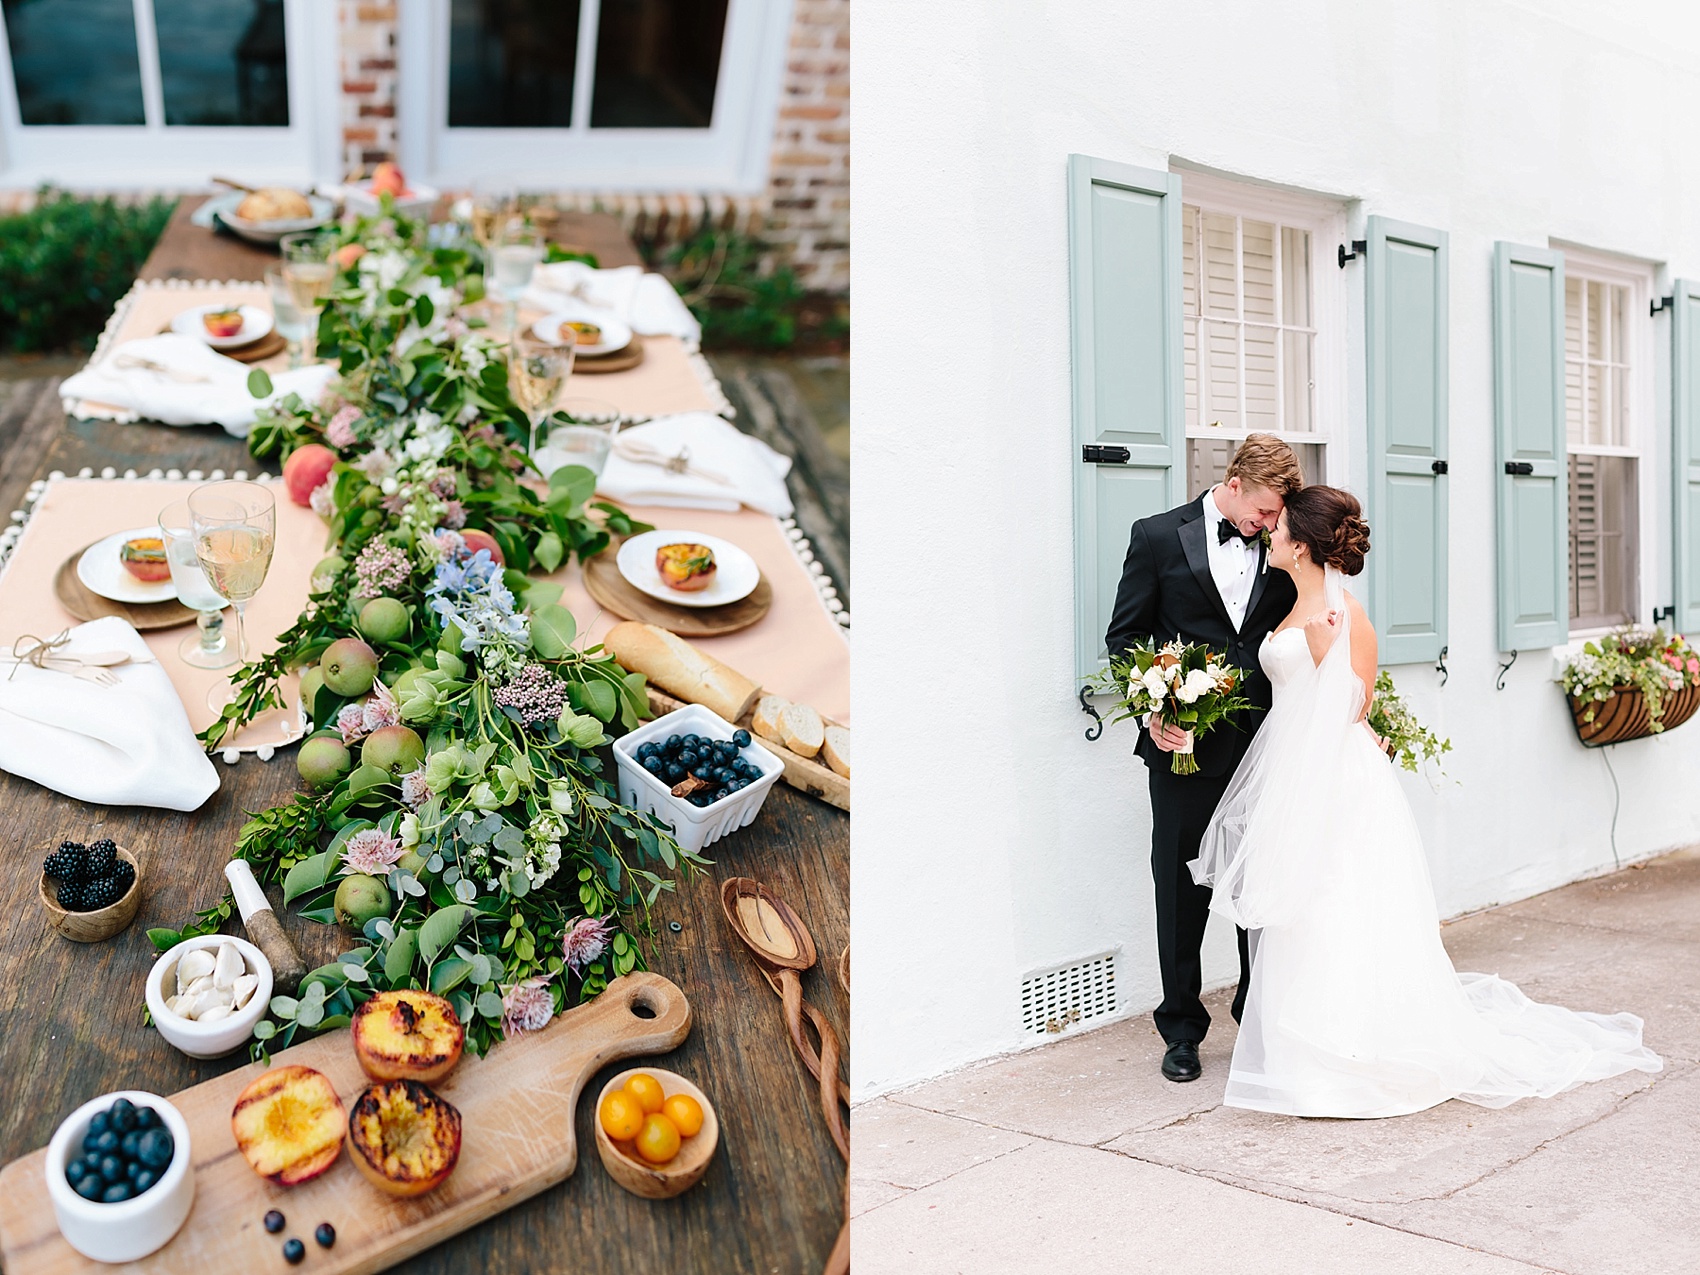 Photos by Lauren Carnes - food on a table and a wedding couple